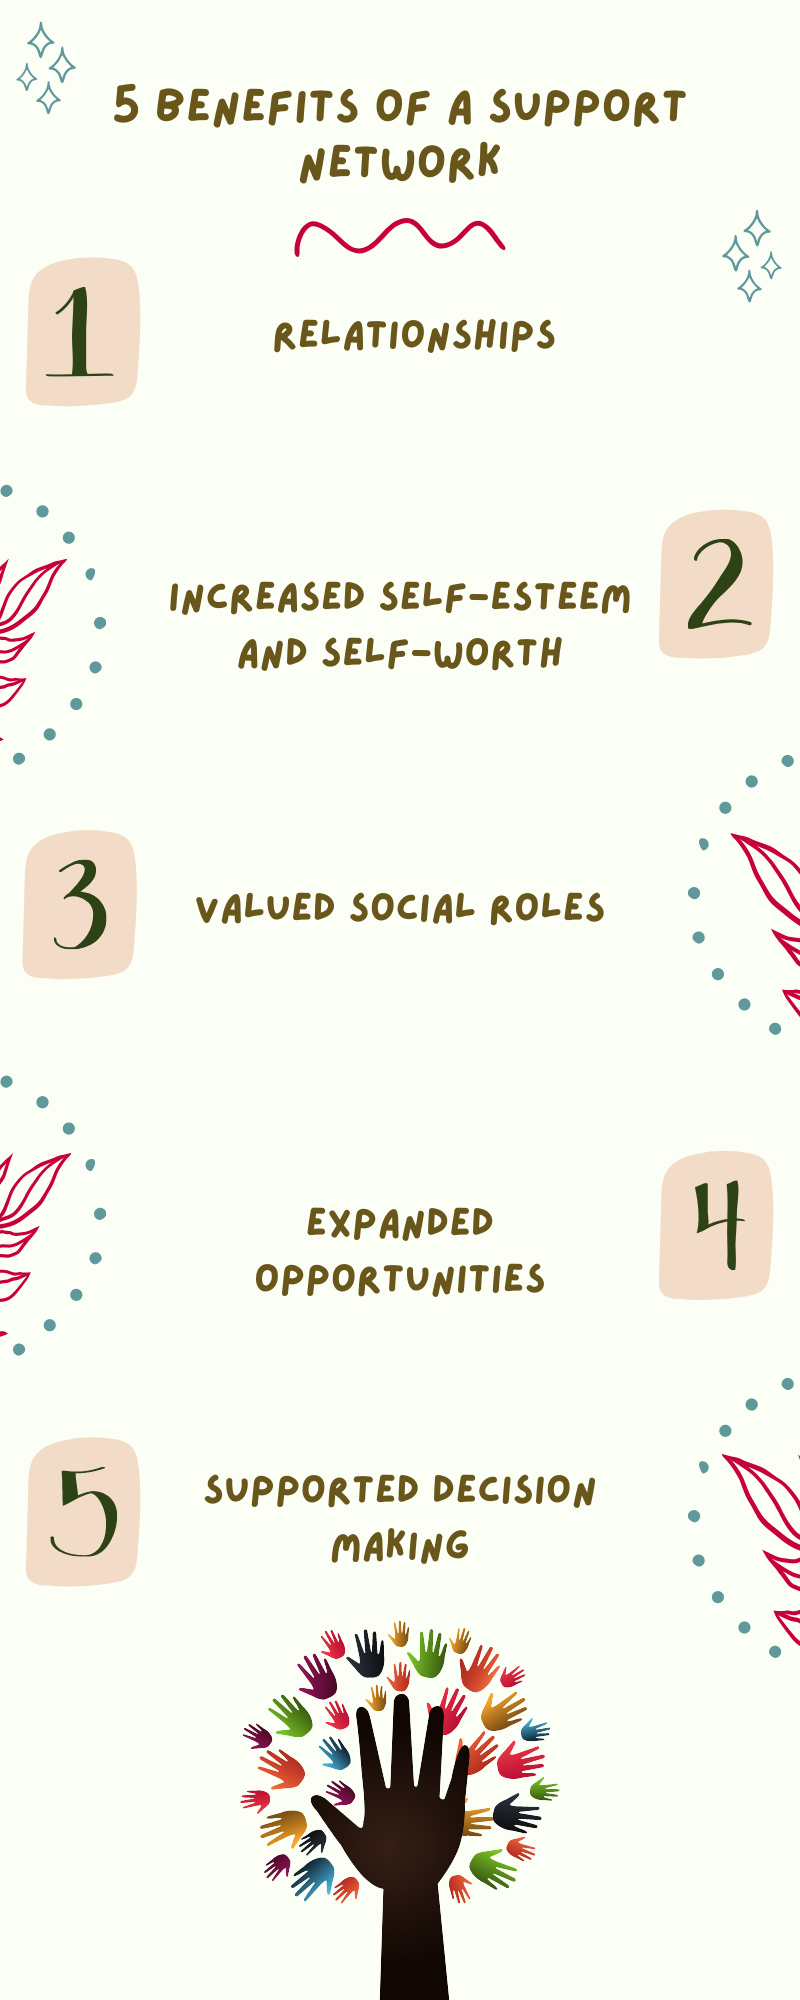 5 benefits of the support network,  Relationships, Increase self esteem and self worth. Valued social rolls, expanded opportunities and supported decision making